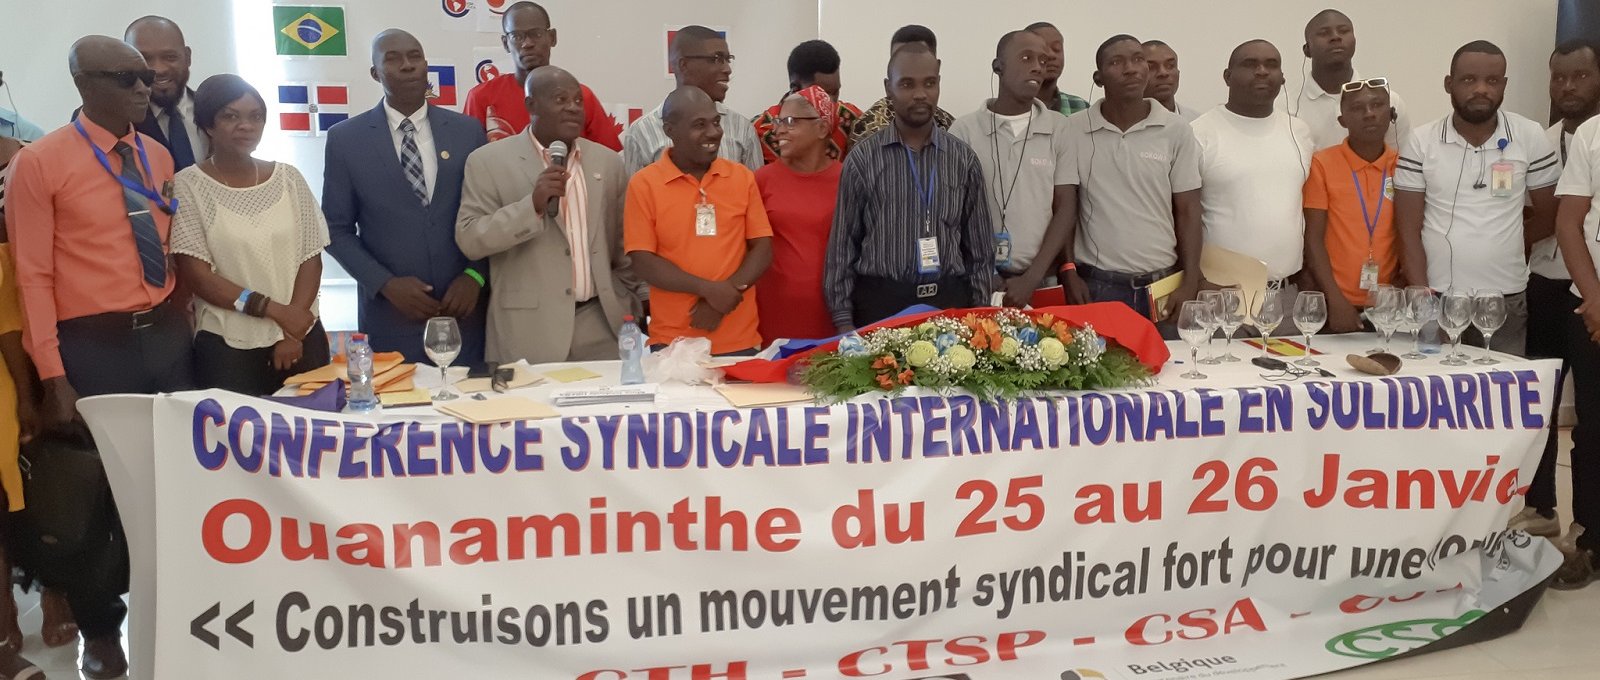 Renewed Calls for International Solidarity from Haitian Trade Unions and Civil Society Organizations